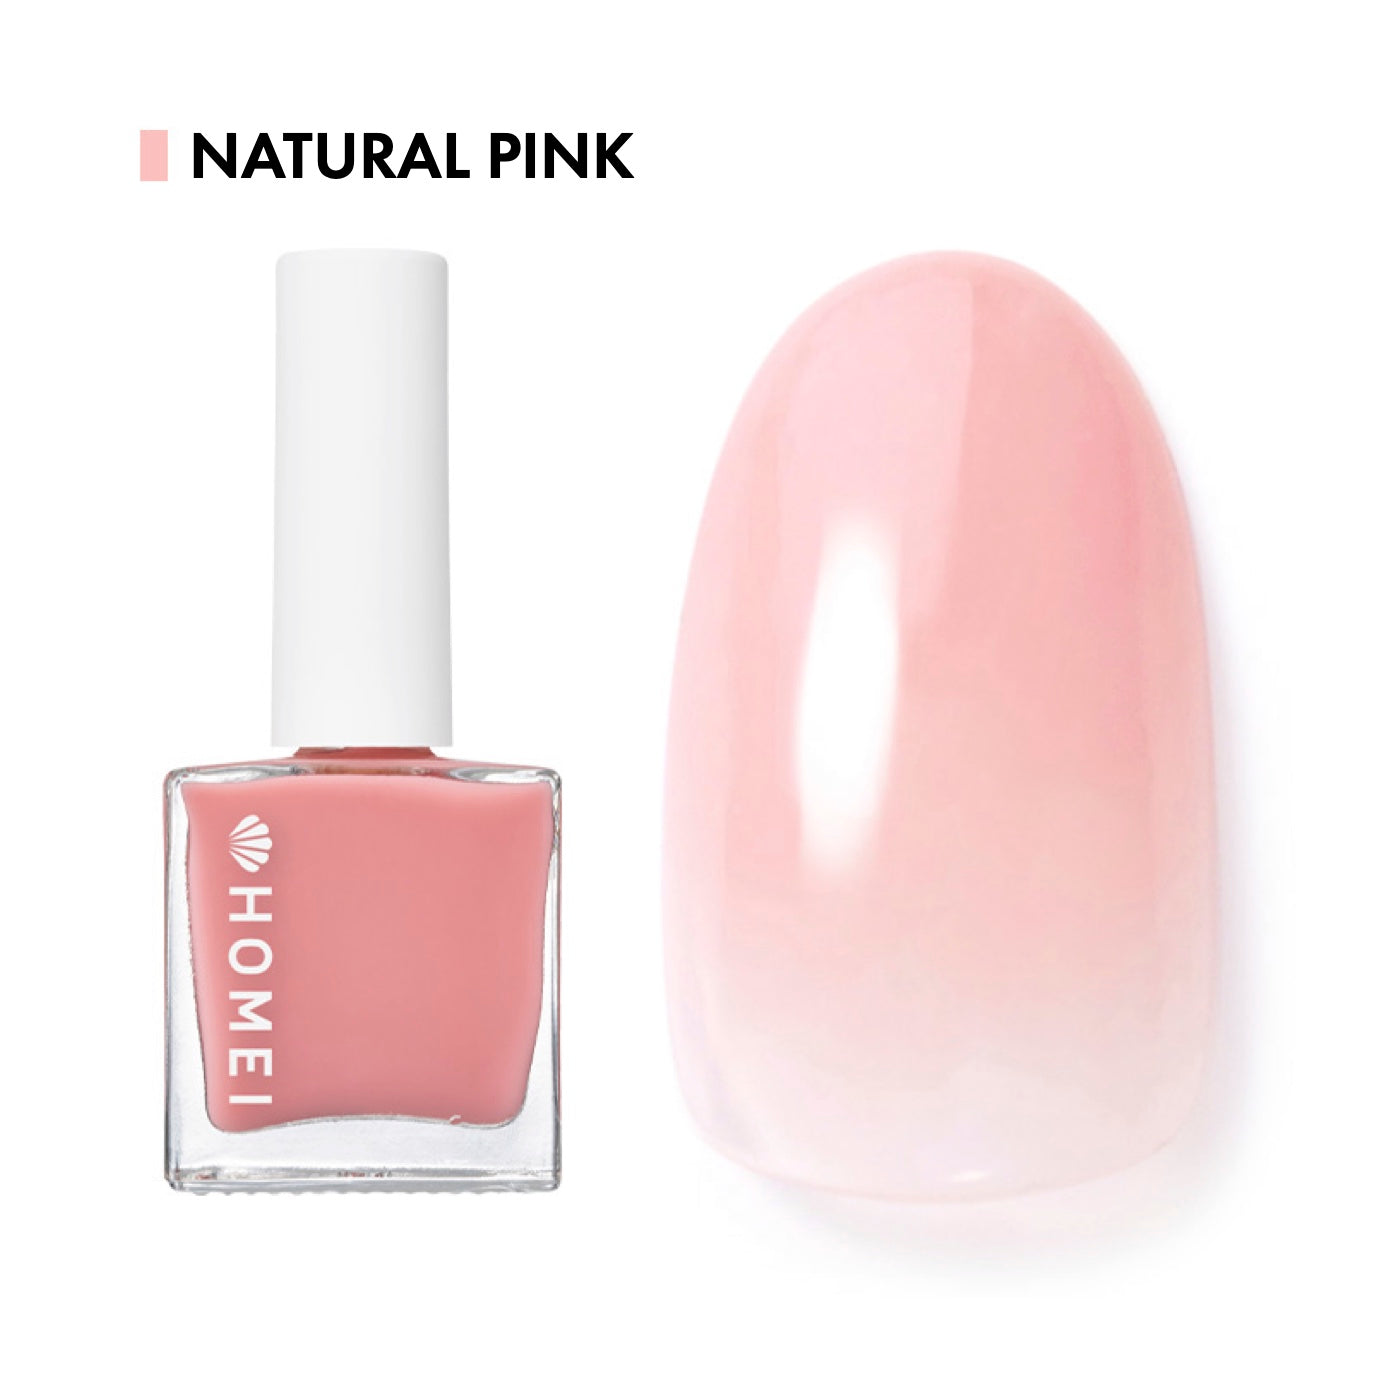 Nail cover hardener nail care polish with naturally healthy color "Natural Pink". Branded by HOMEI Weekly Gel. Free from 12 harsh ingredients so we name this 12FREE.